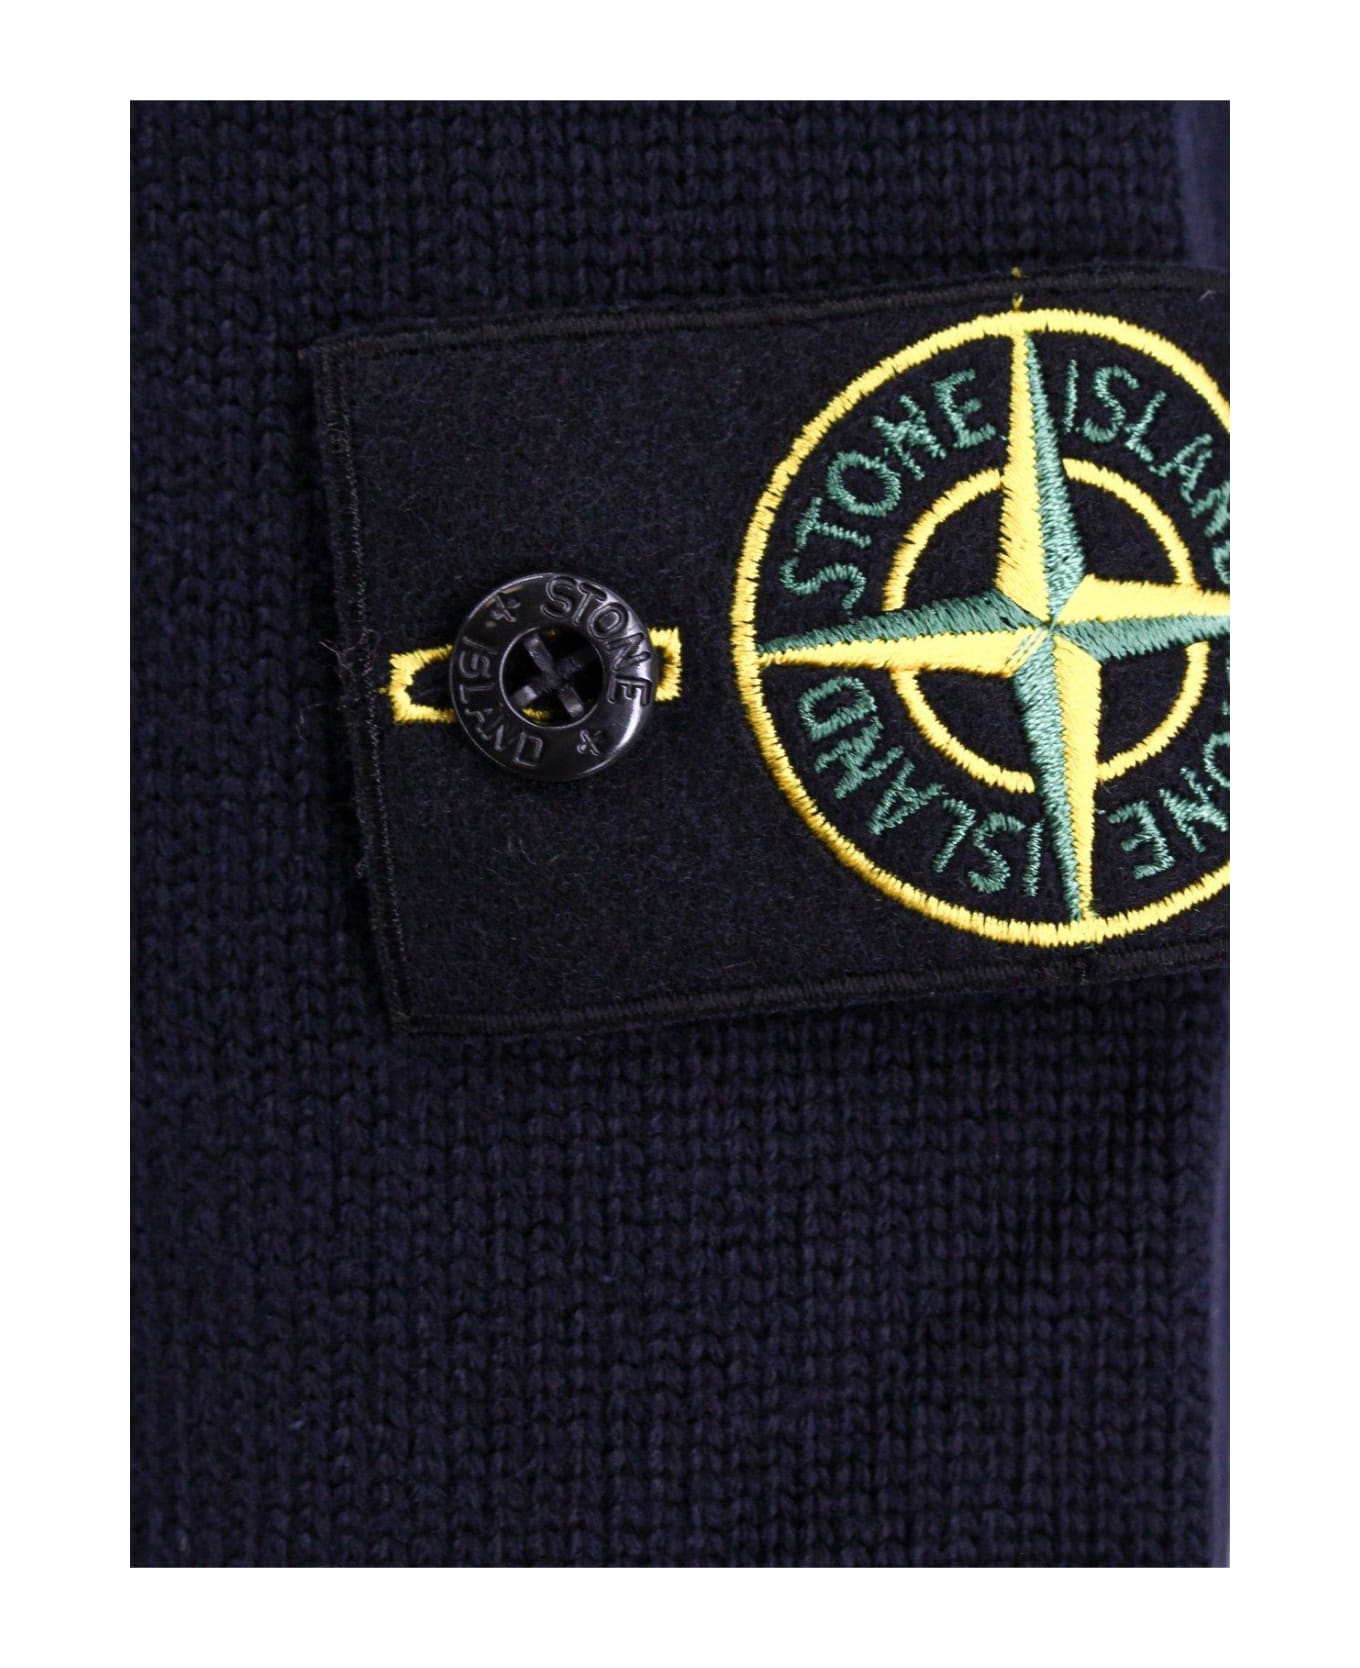 Stone Island Compass Patch Button-up Cardigan - Blue カーディガン